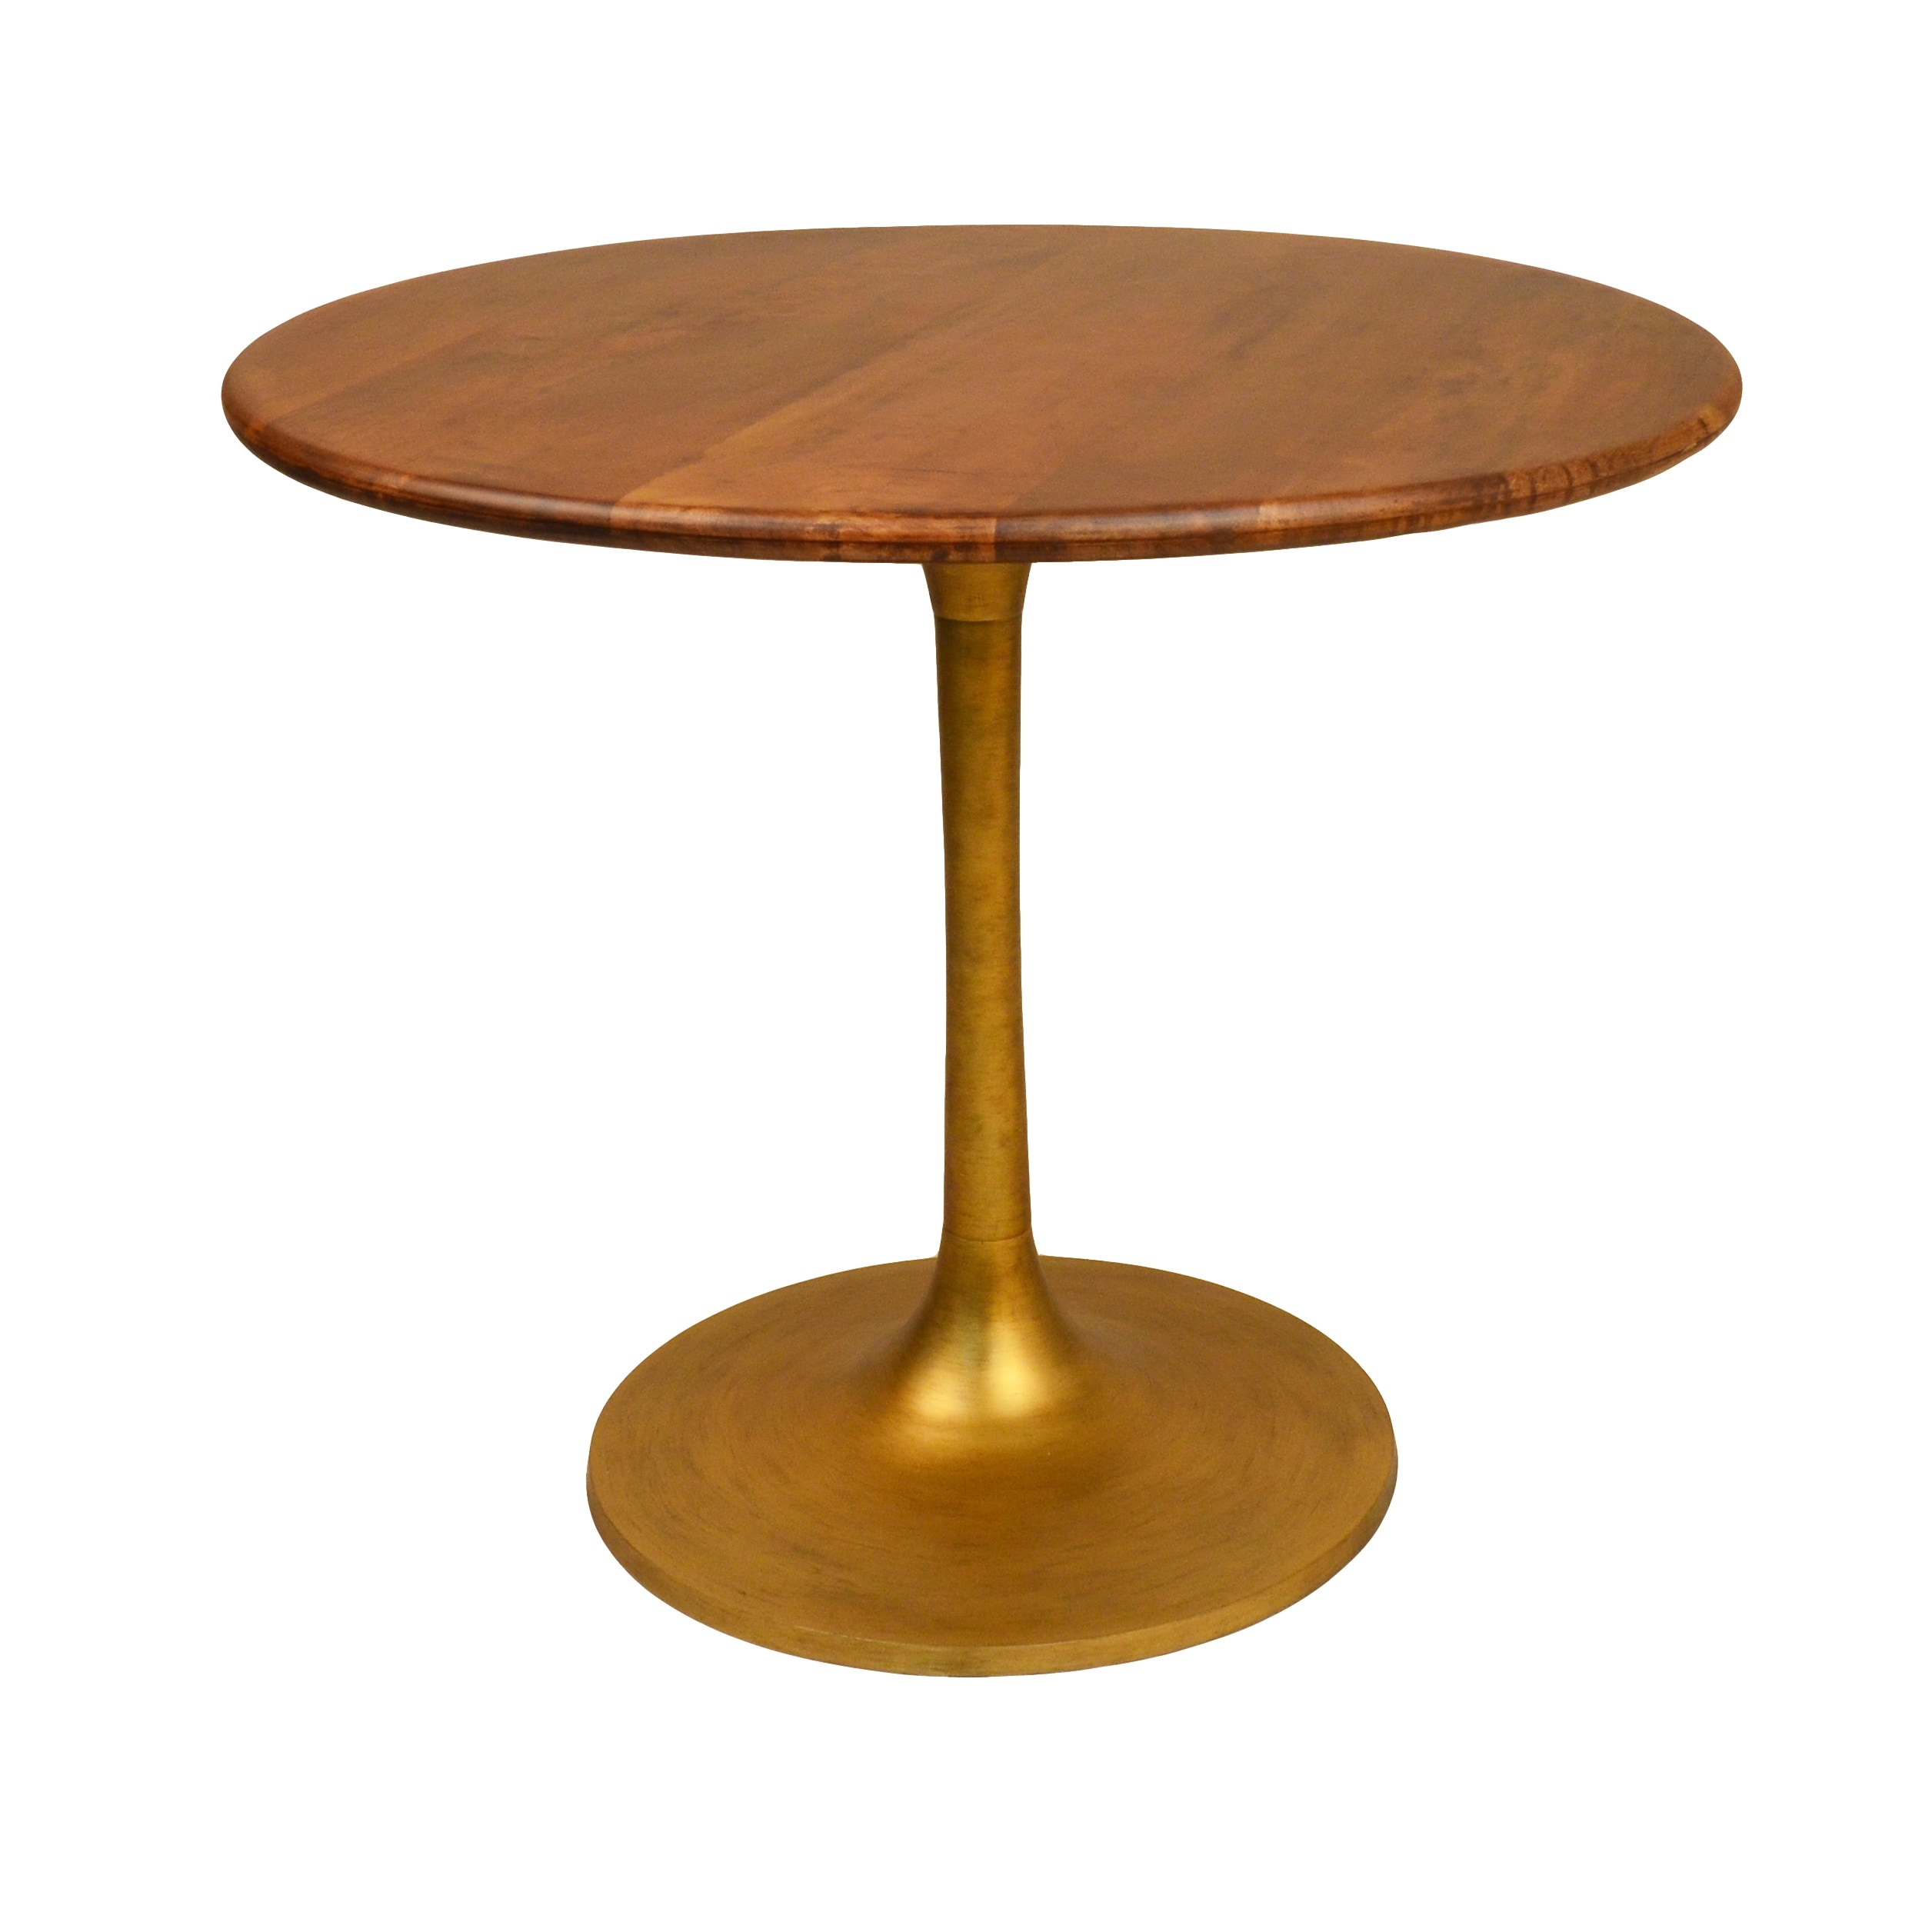 Rayna 36 Inch Round Wood Top Dining Table Overstock 31904810